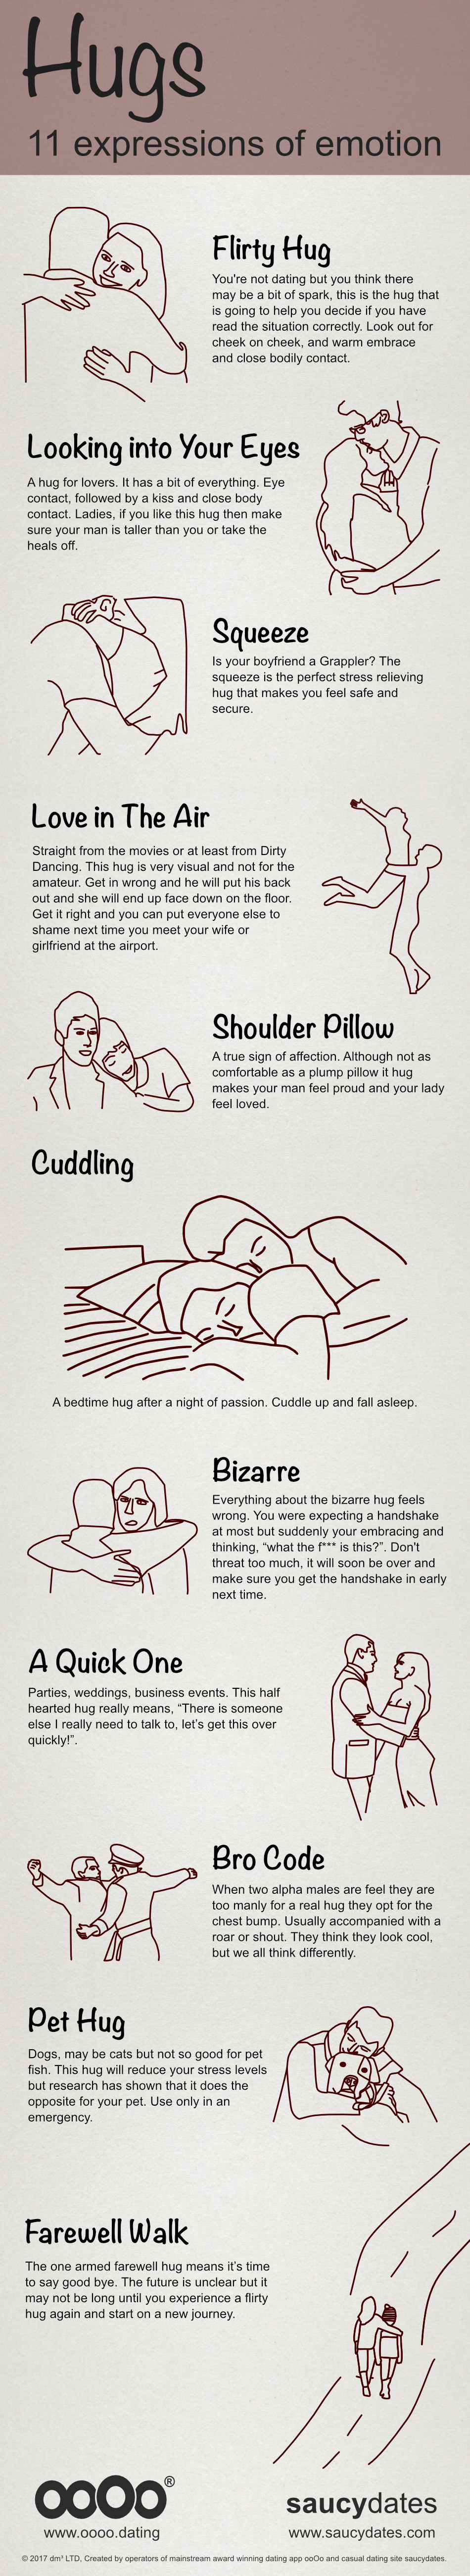 types of hugs infographic